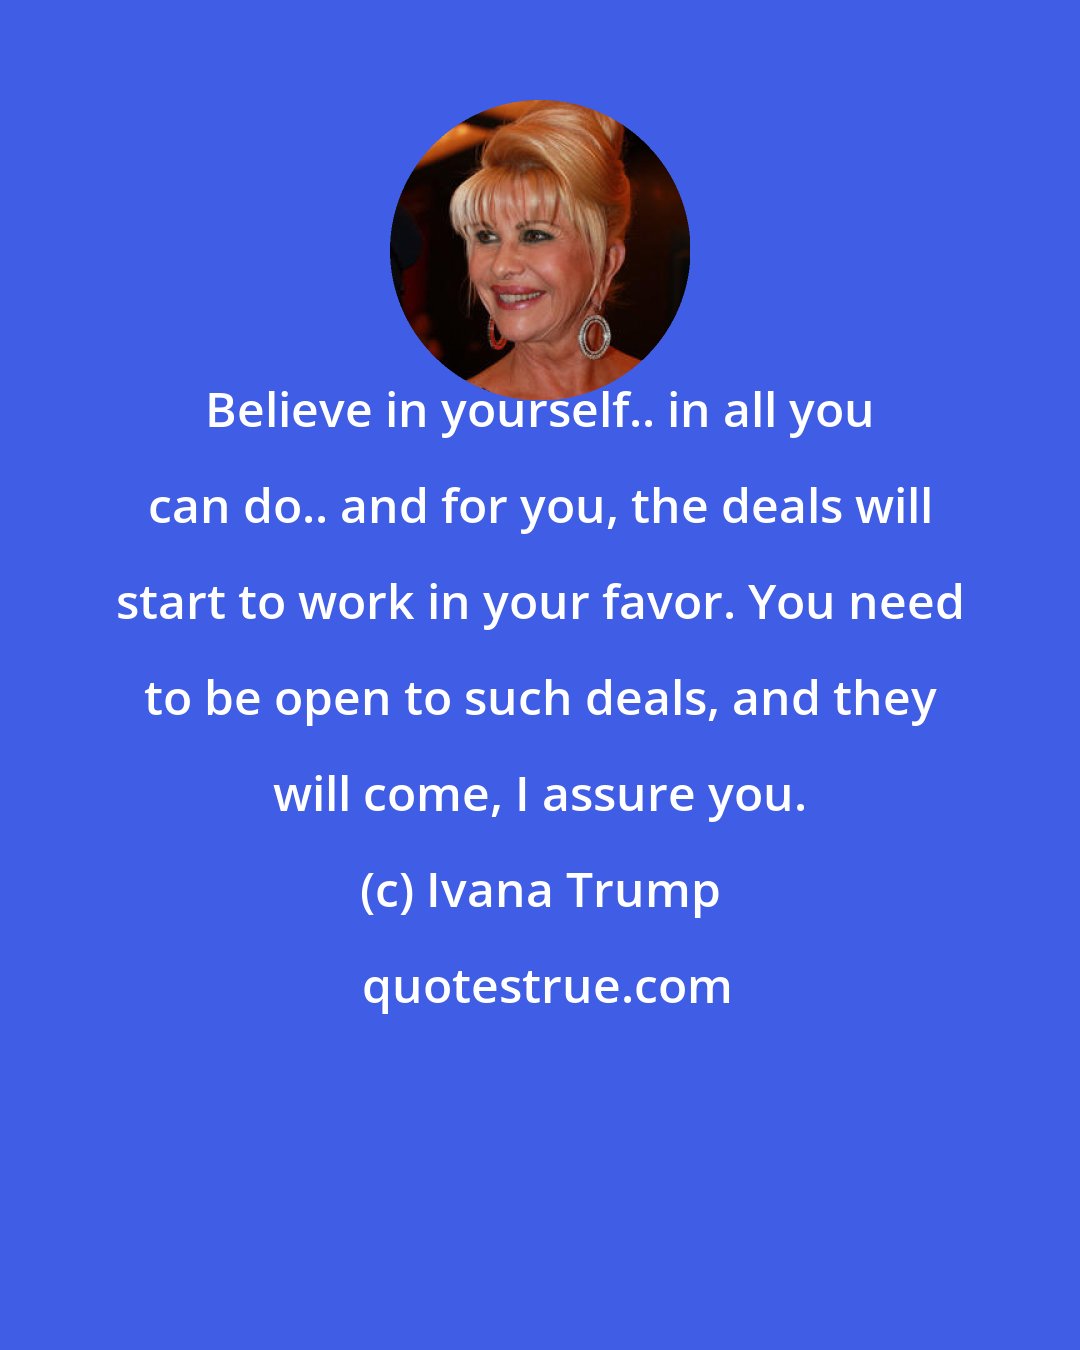 Ivana Trump: Believe in yourself.. in all you can do.. and for you, the deals will start to work in your favor. You need to be open to such deals, and they will come, I assure you.